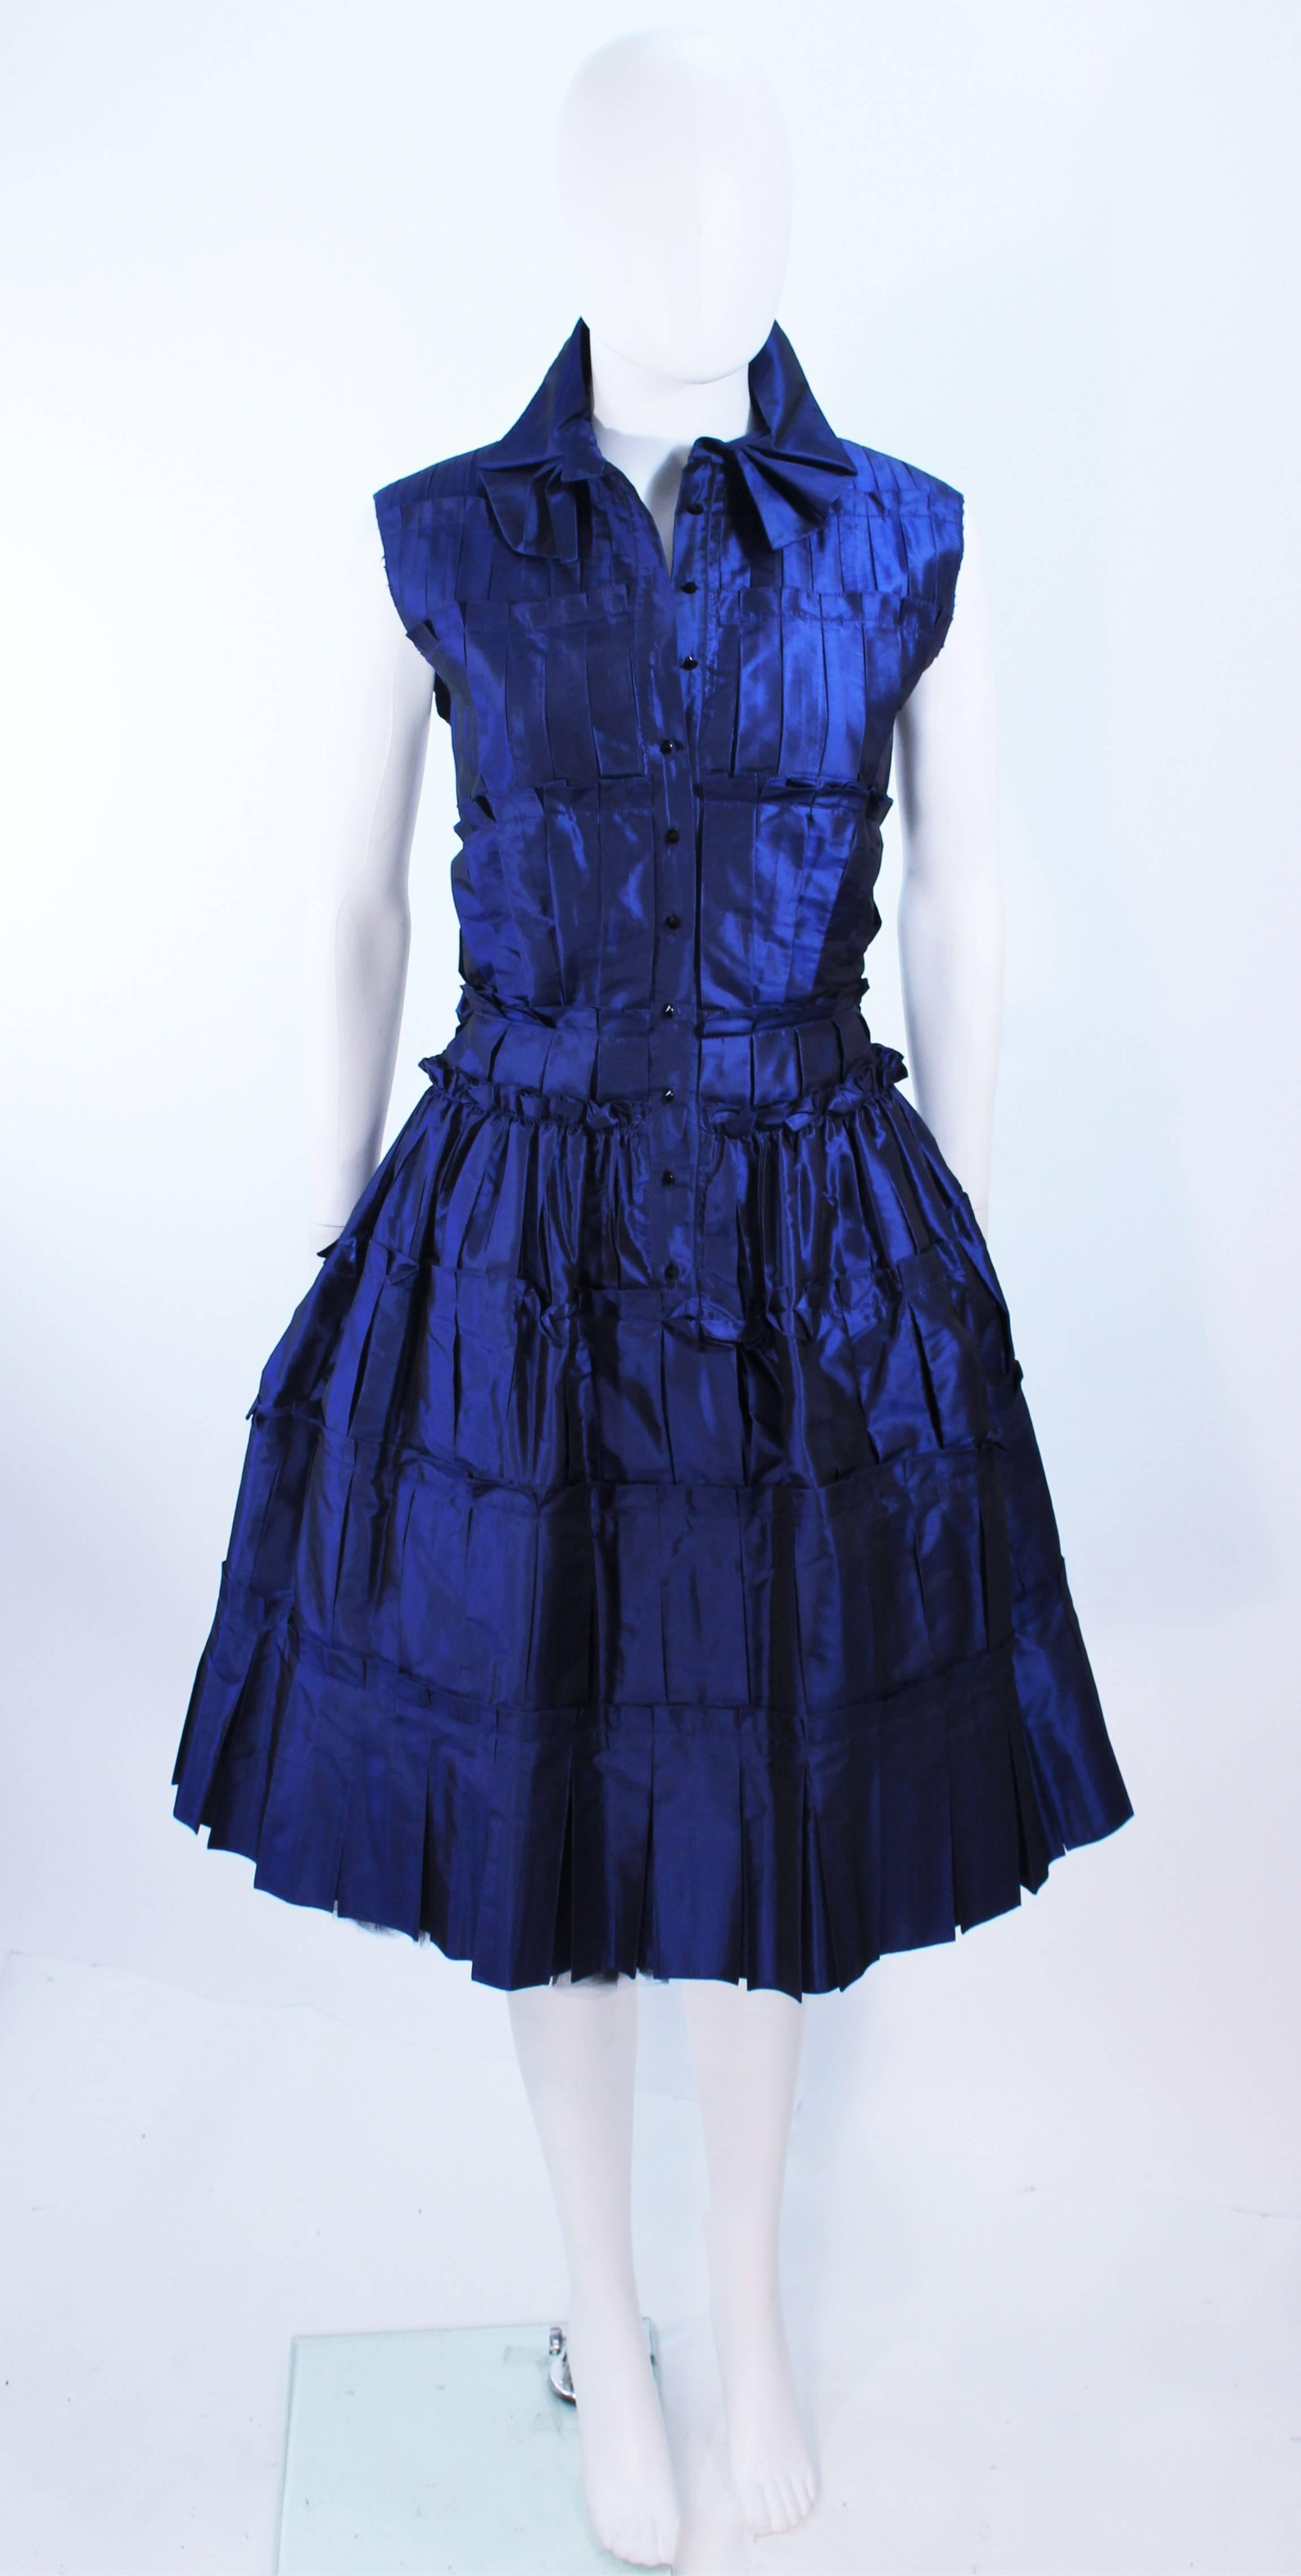 This Oscar De La Renta cocktail dress is composed of a blue silk with a pintuck-pleat gathered design. Features center front button closures. Comes with an interior crinoline. In excellent pre-owned condition, barely used.

**Please